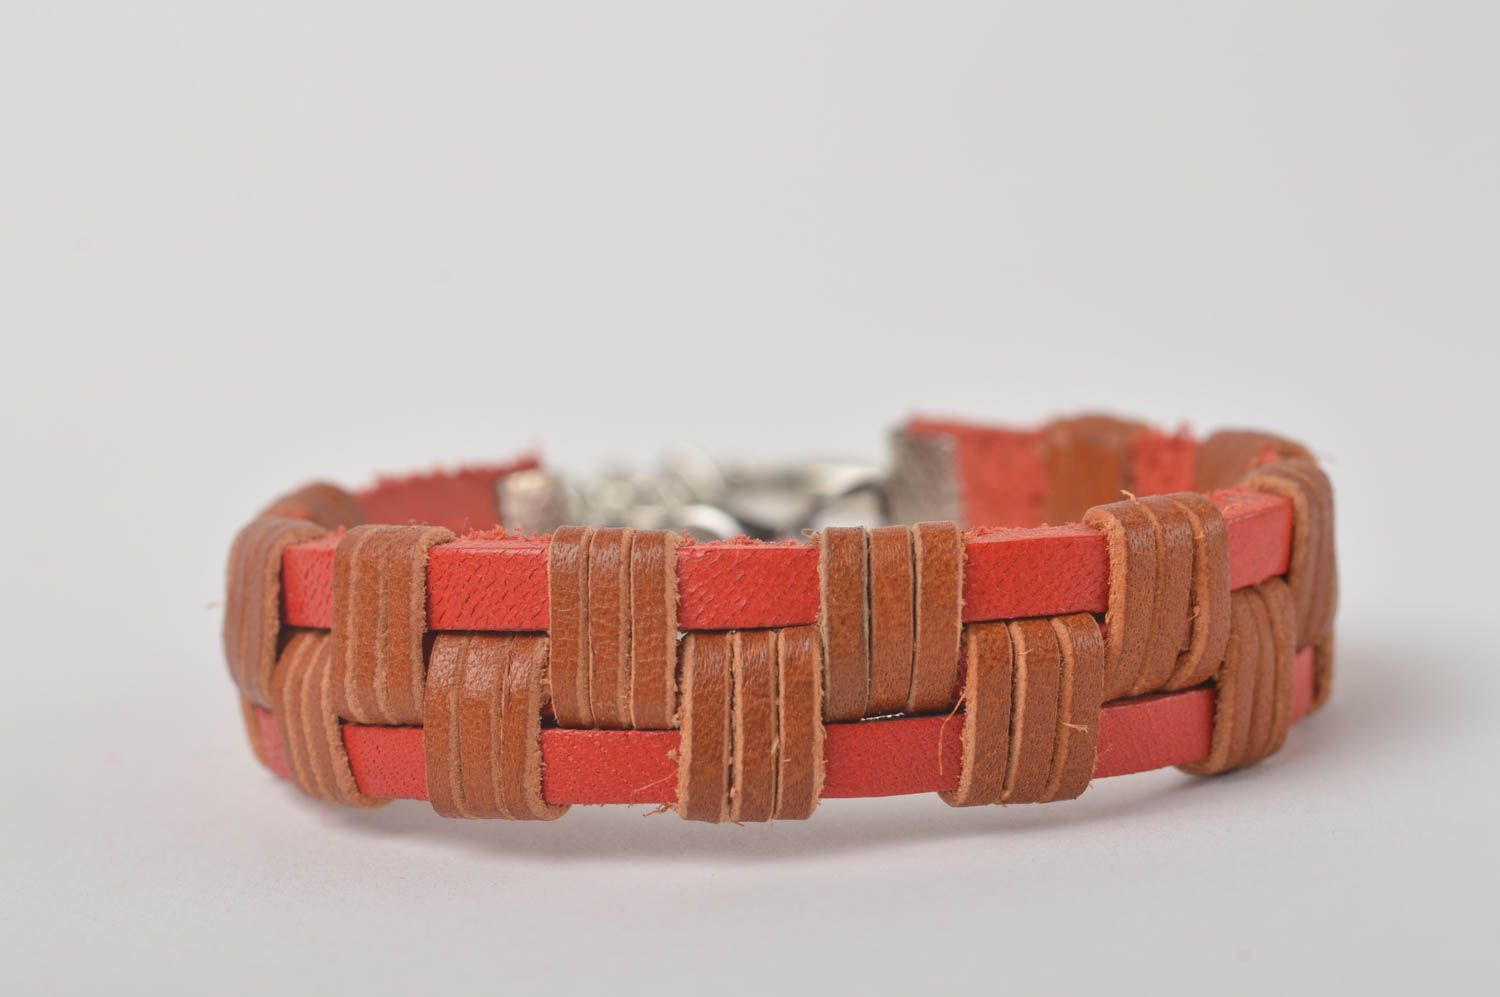 Handmade leather bracelet designs cool jewelry leather goods gift ideas photo 5